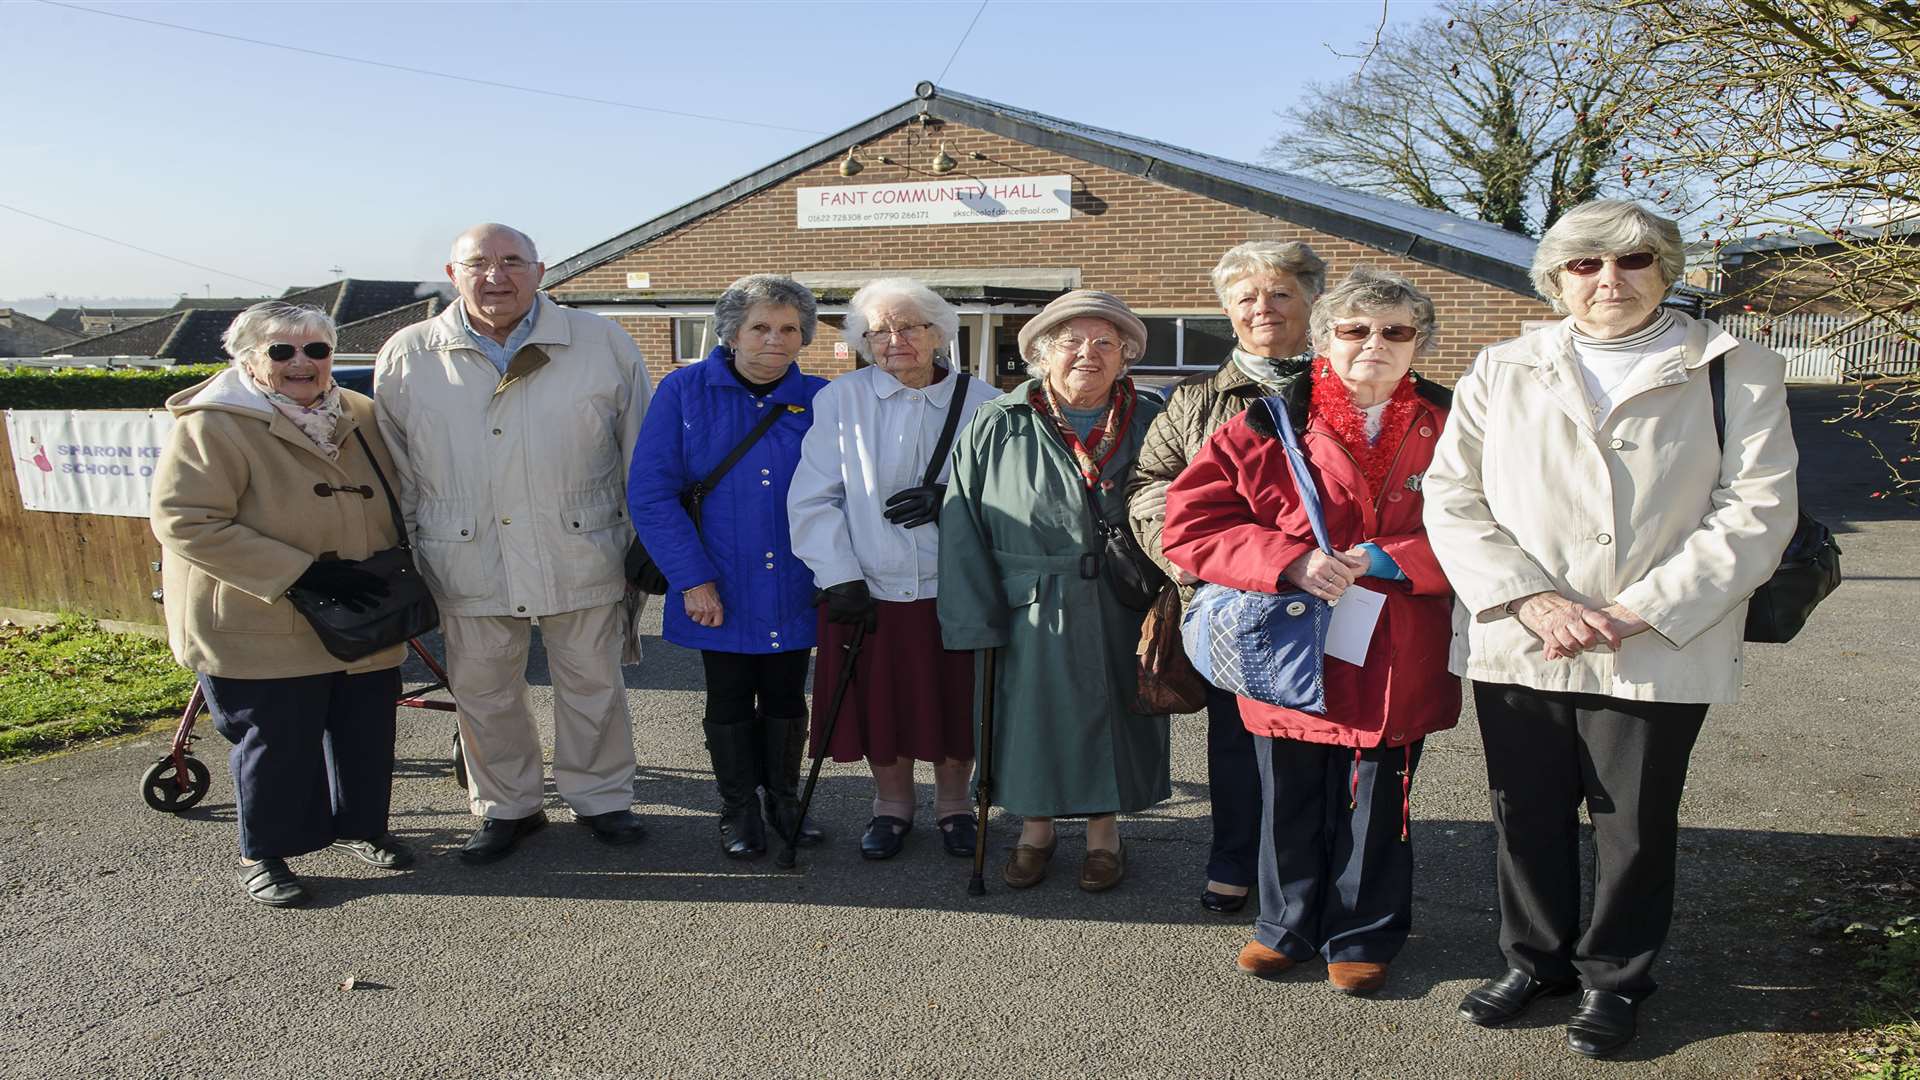 The Barming Active Retirement Association (BarmARA) has been told it can no longer use its current time slot at Fant Community Hall as the nursery based there needs to extend its hours